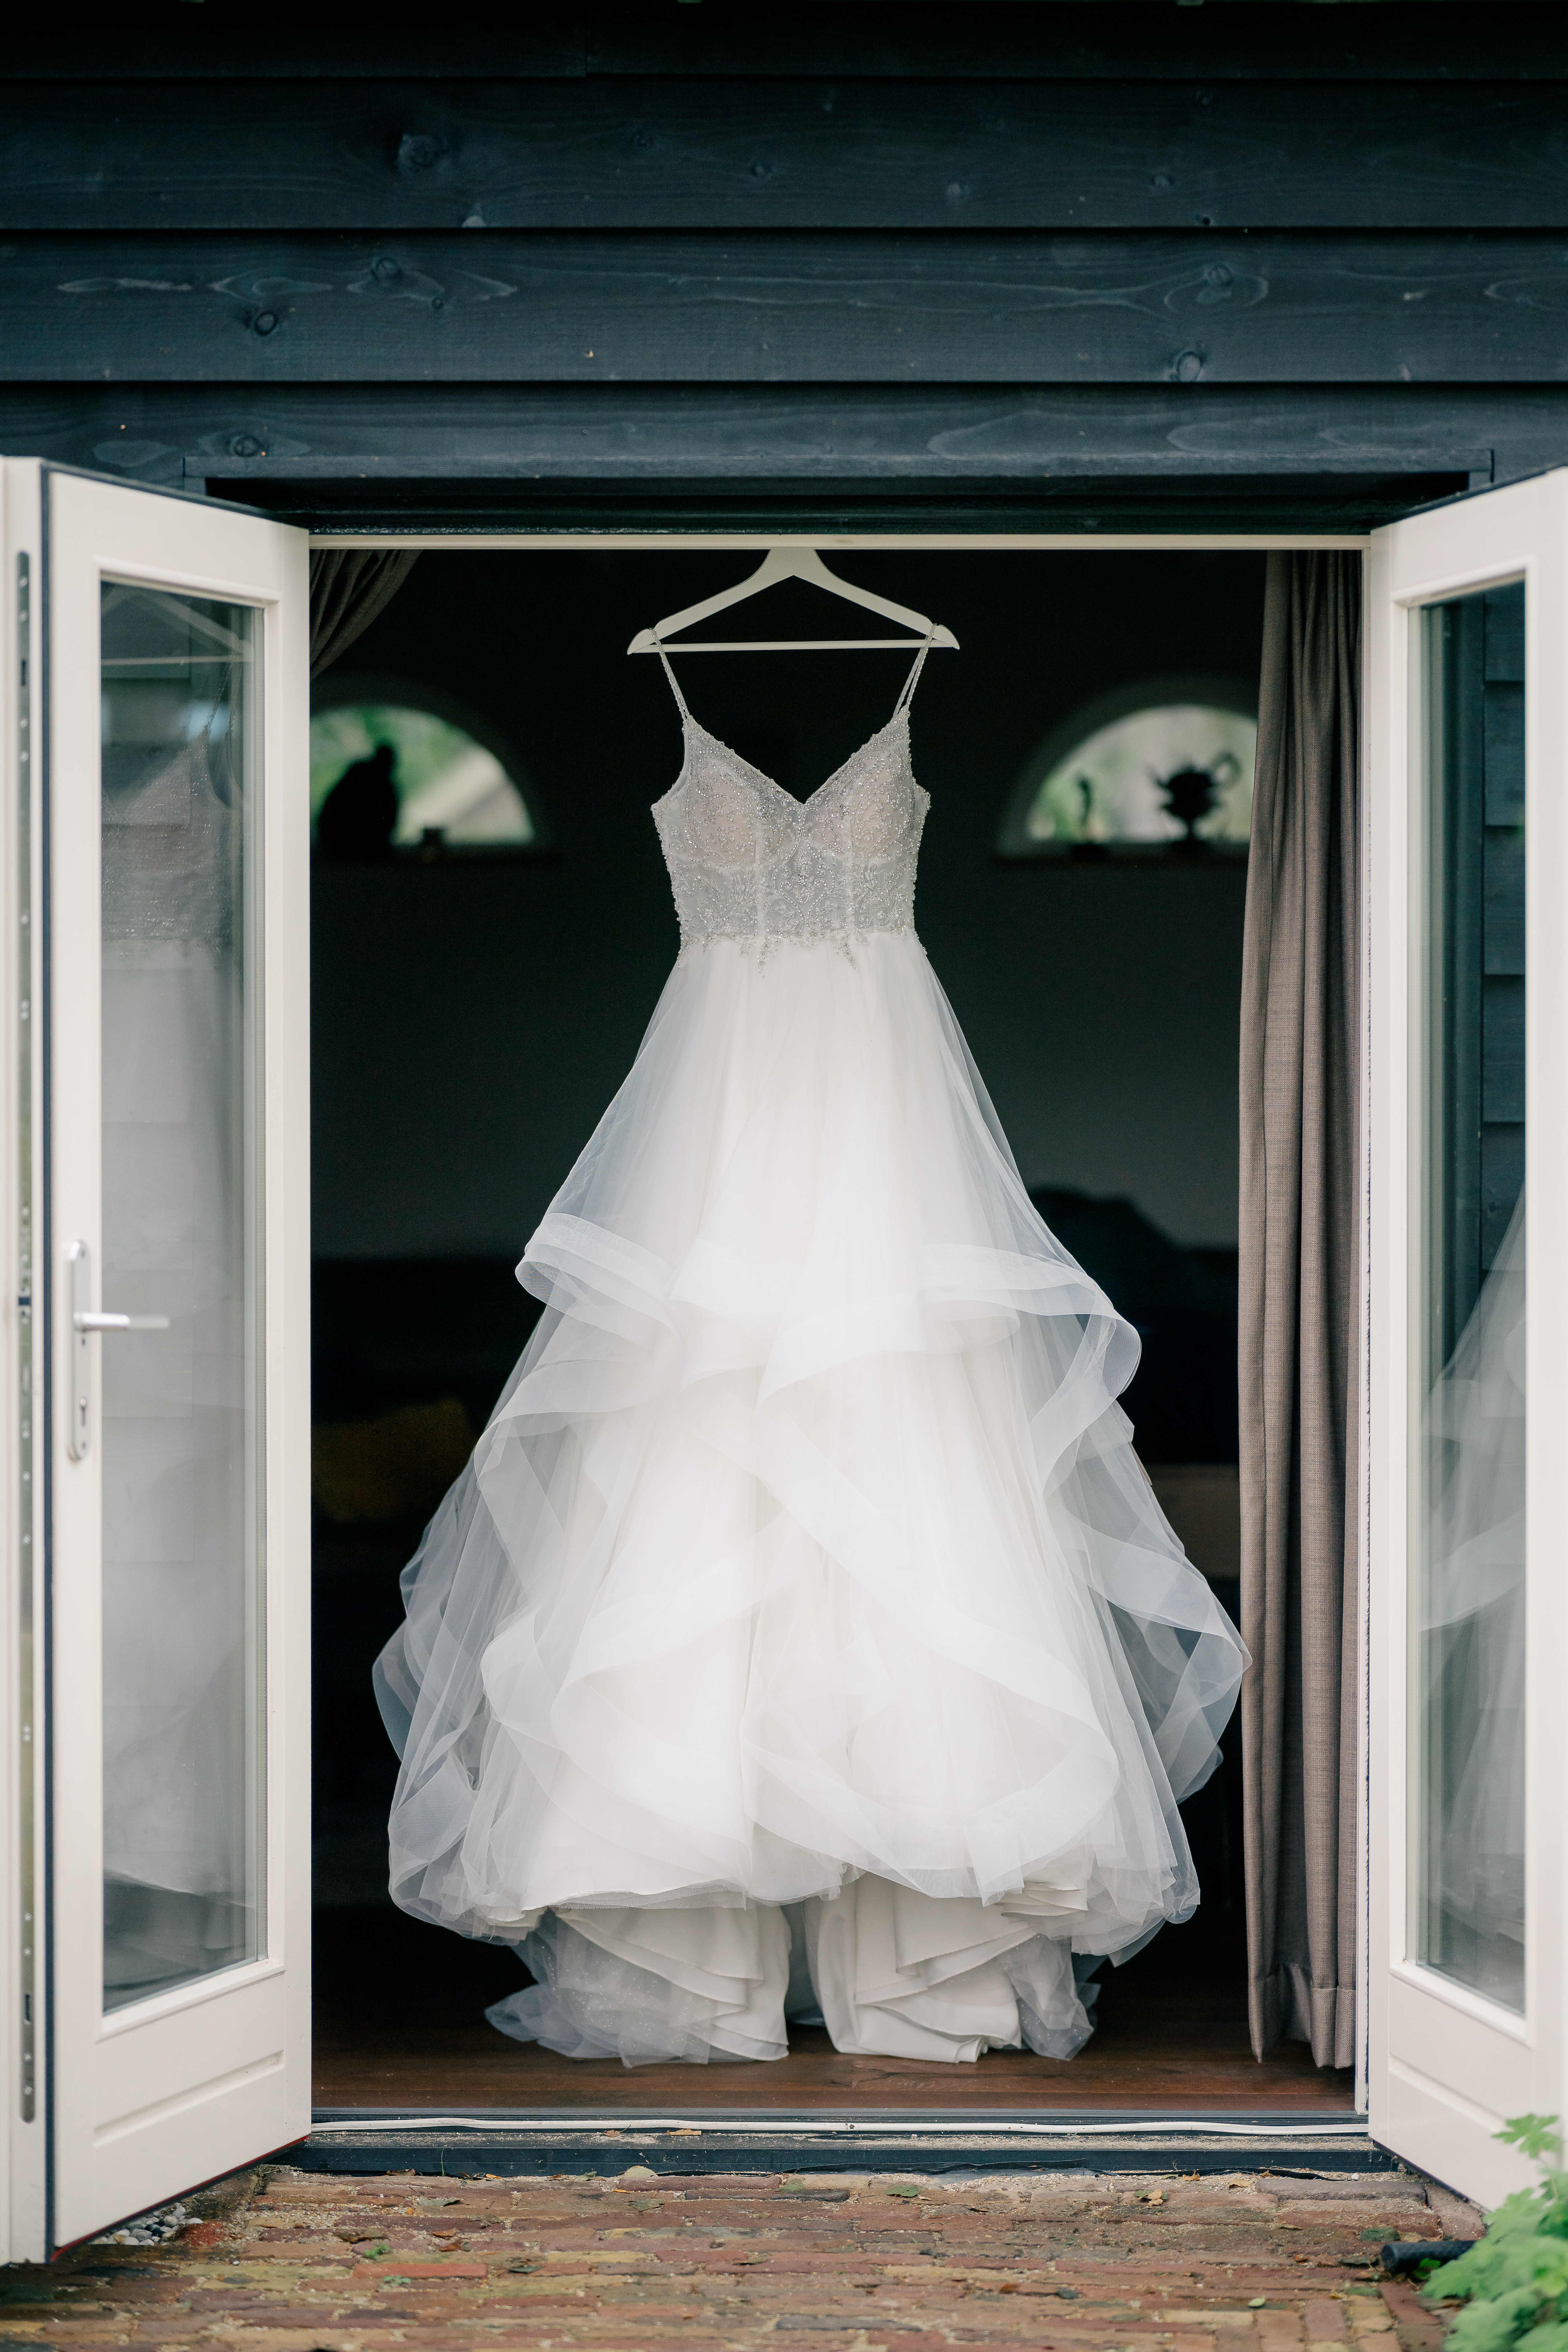 View of a sleeveless white wedding dress hanging in the double door garden entry of a home in Heerle